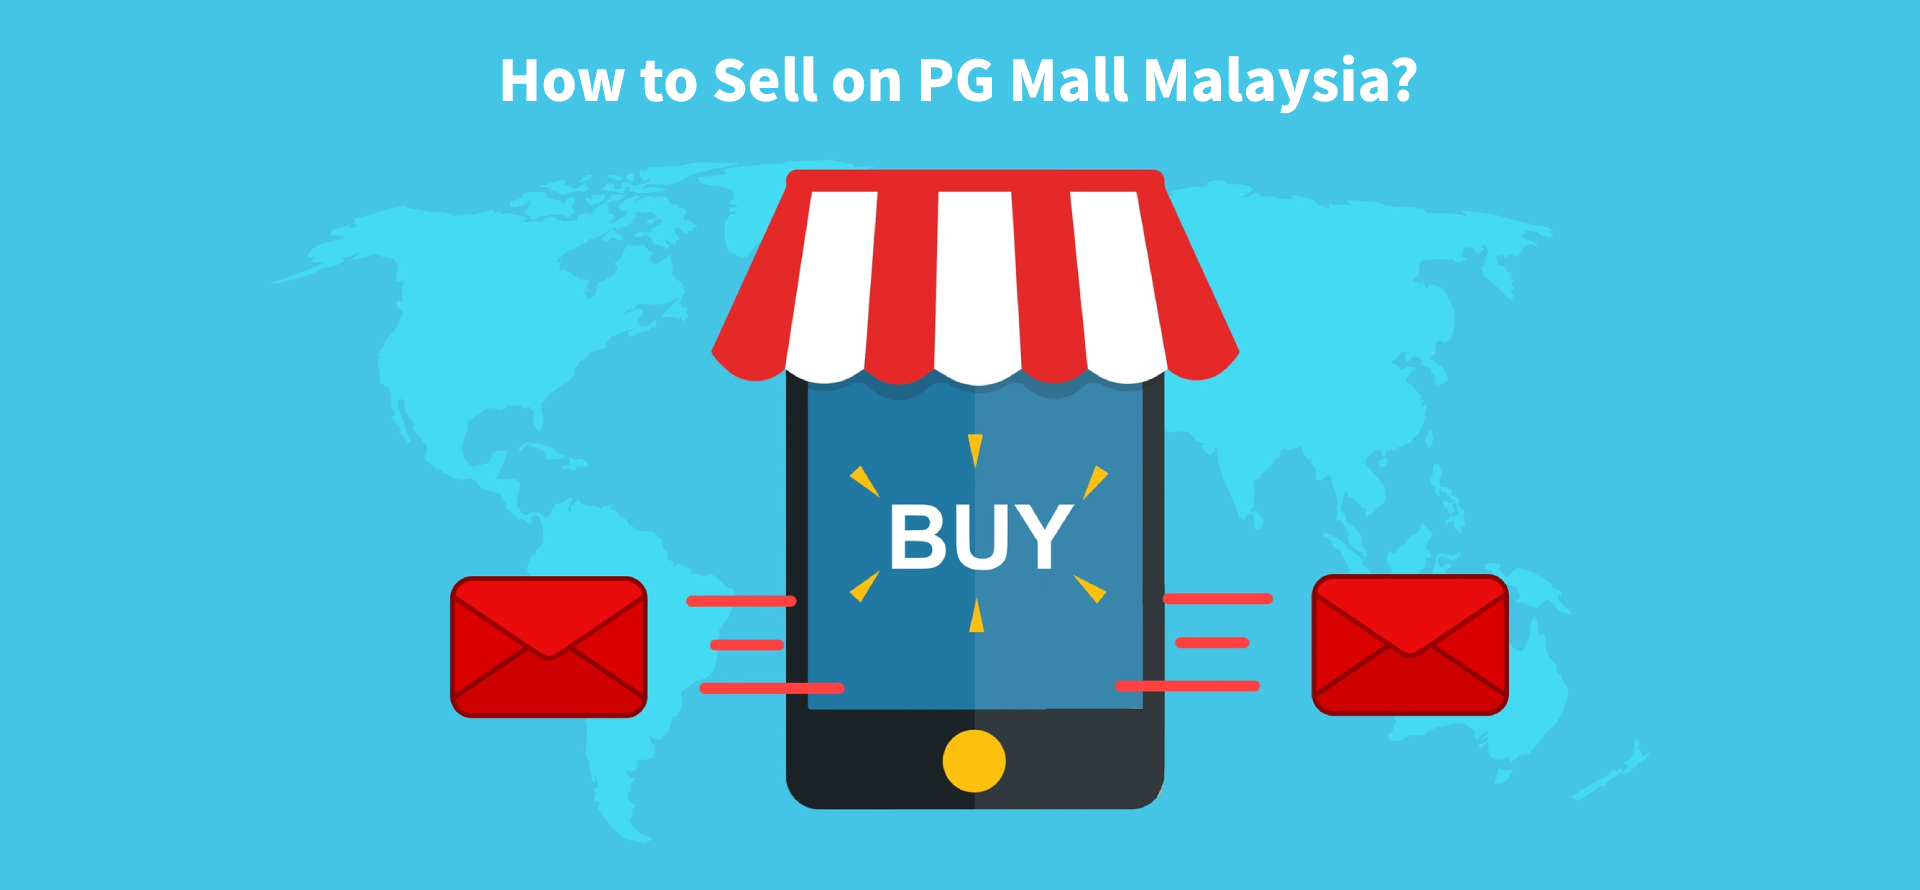 How to Sell on PG Mall Malaysia?